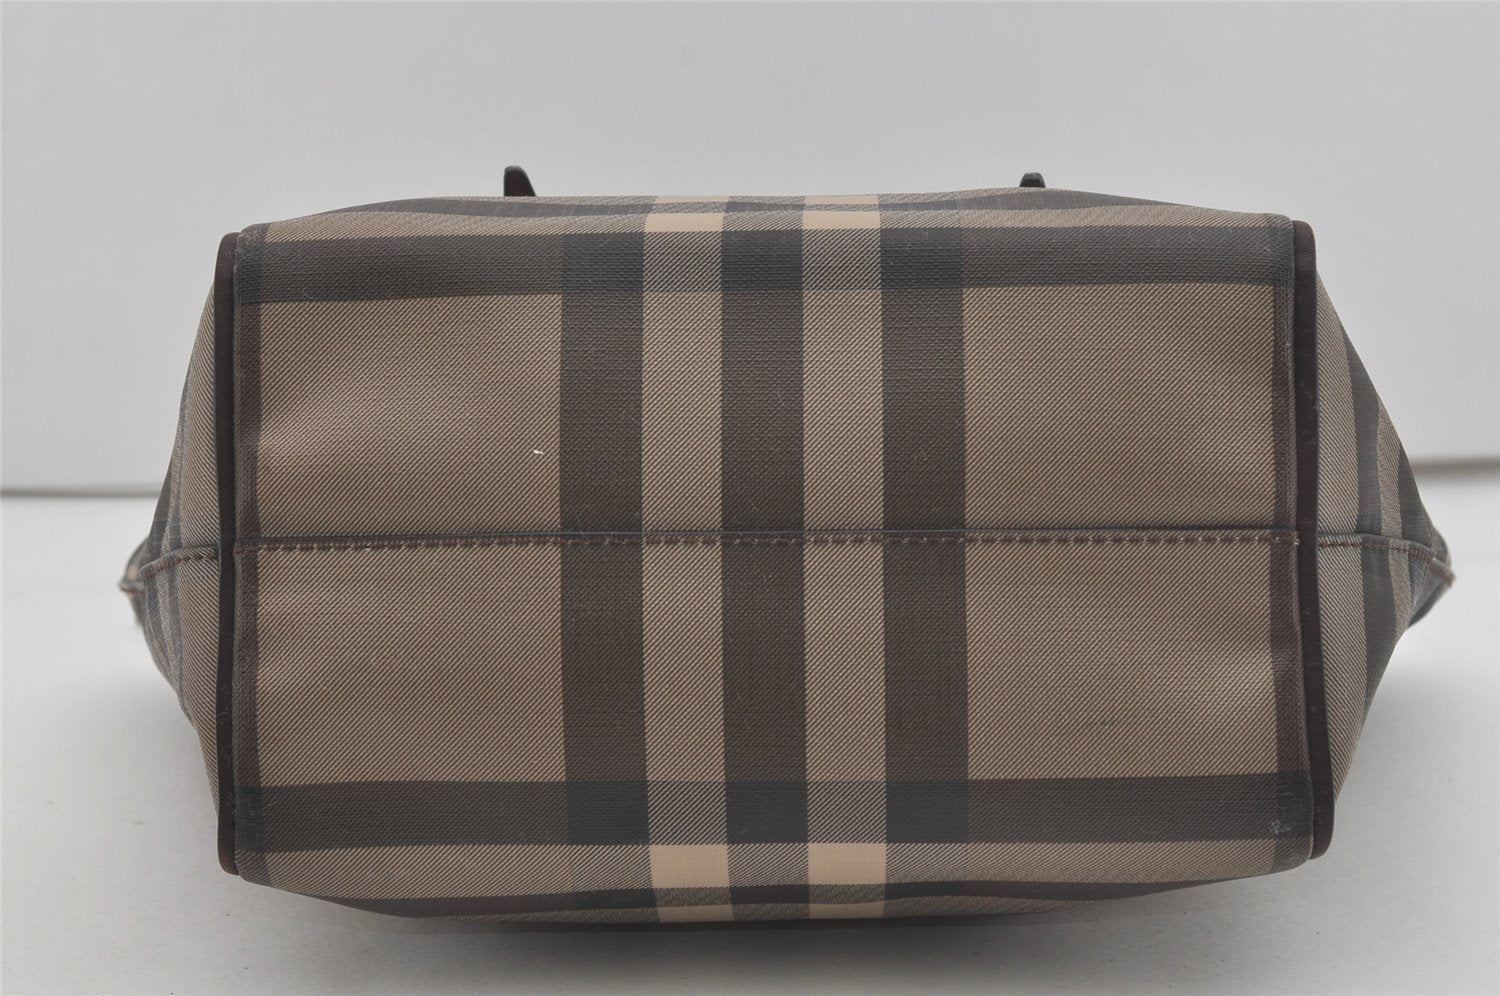 Authentic BURBERRY Check Vintage Shoulder Hand Tote Bag PVC Leather Gray 7845I